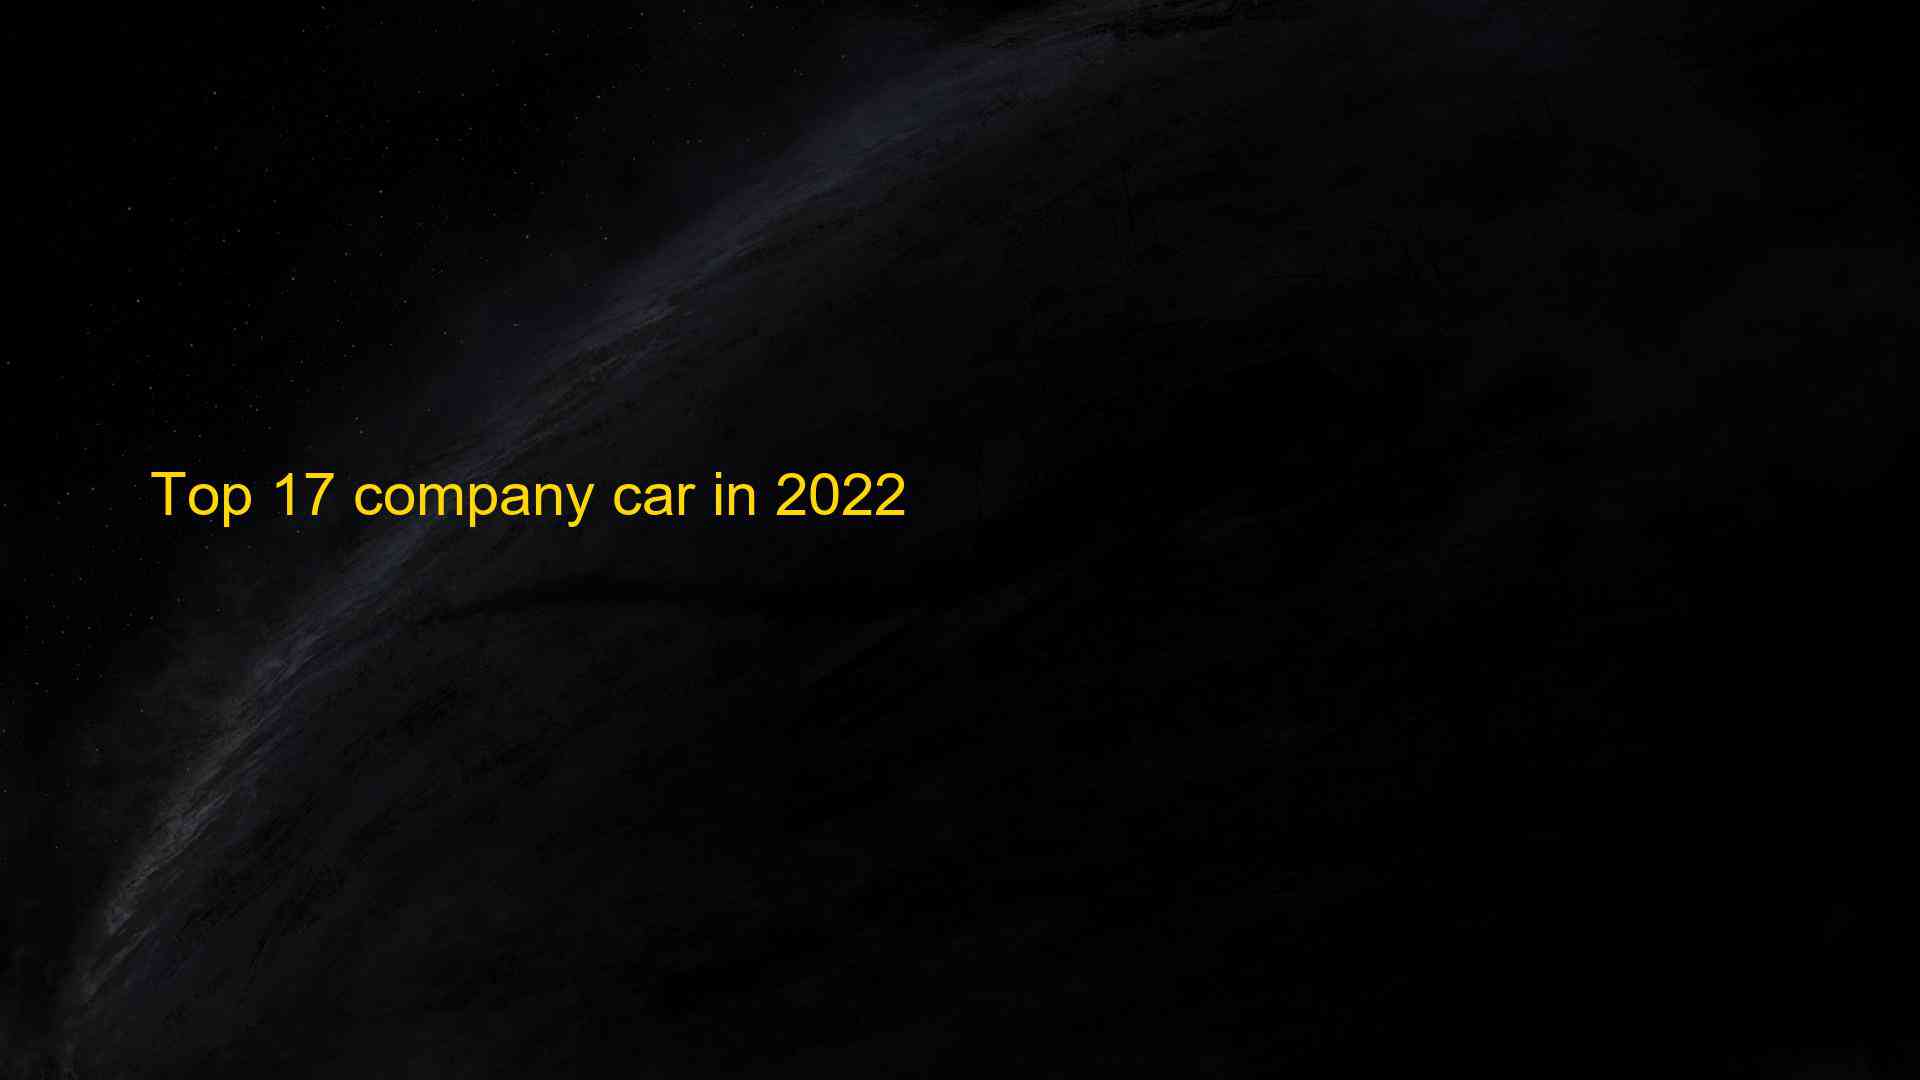 Top 17 company car in 2022 1660062615